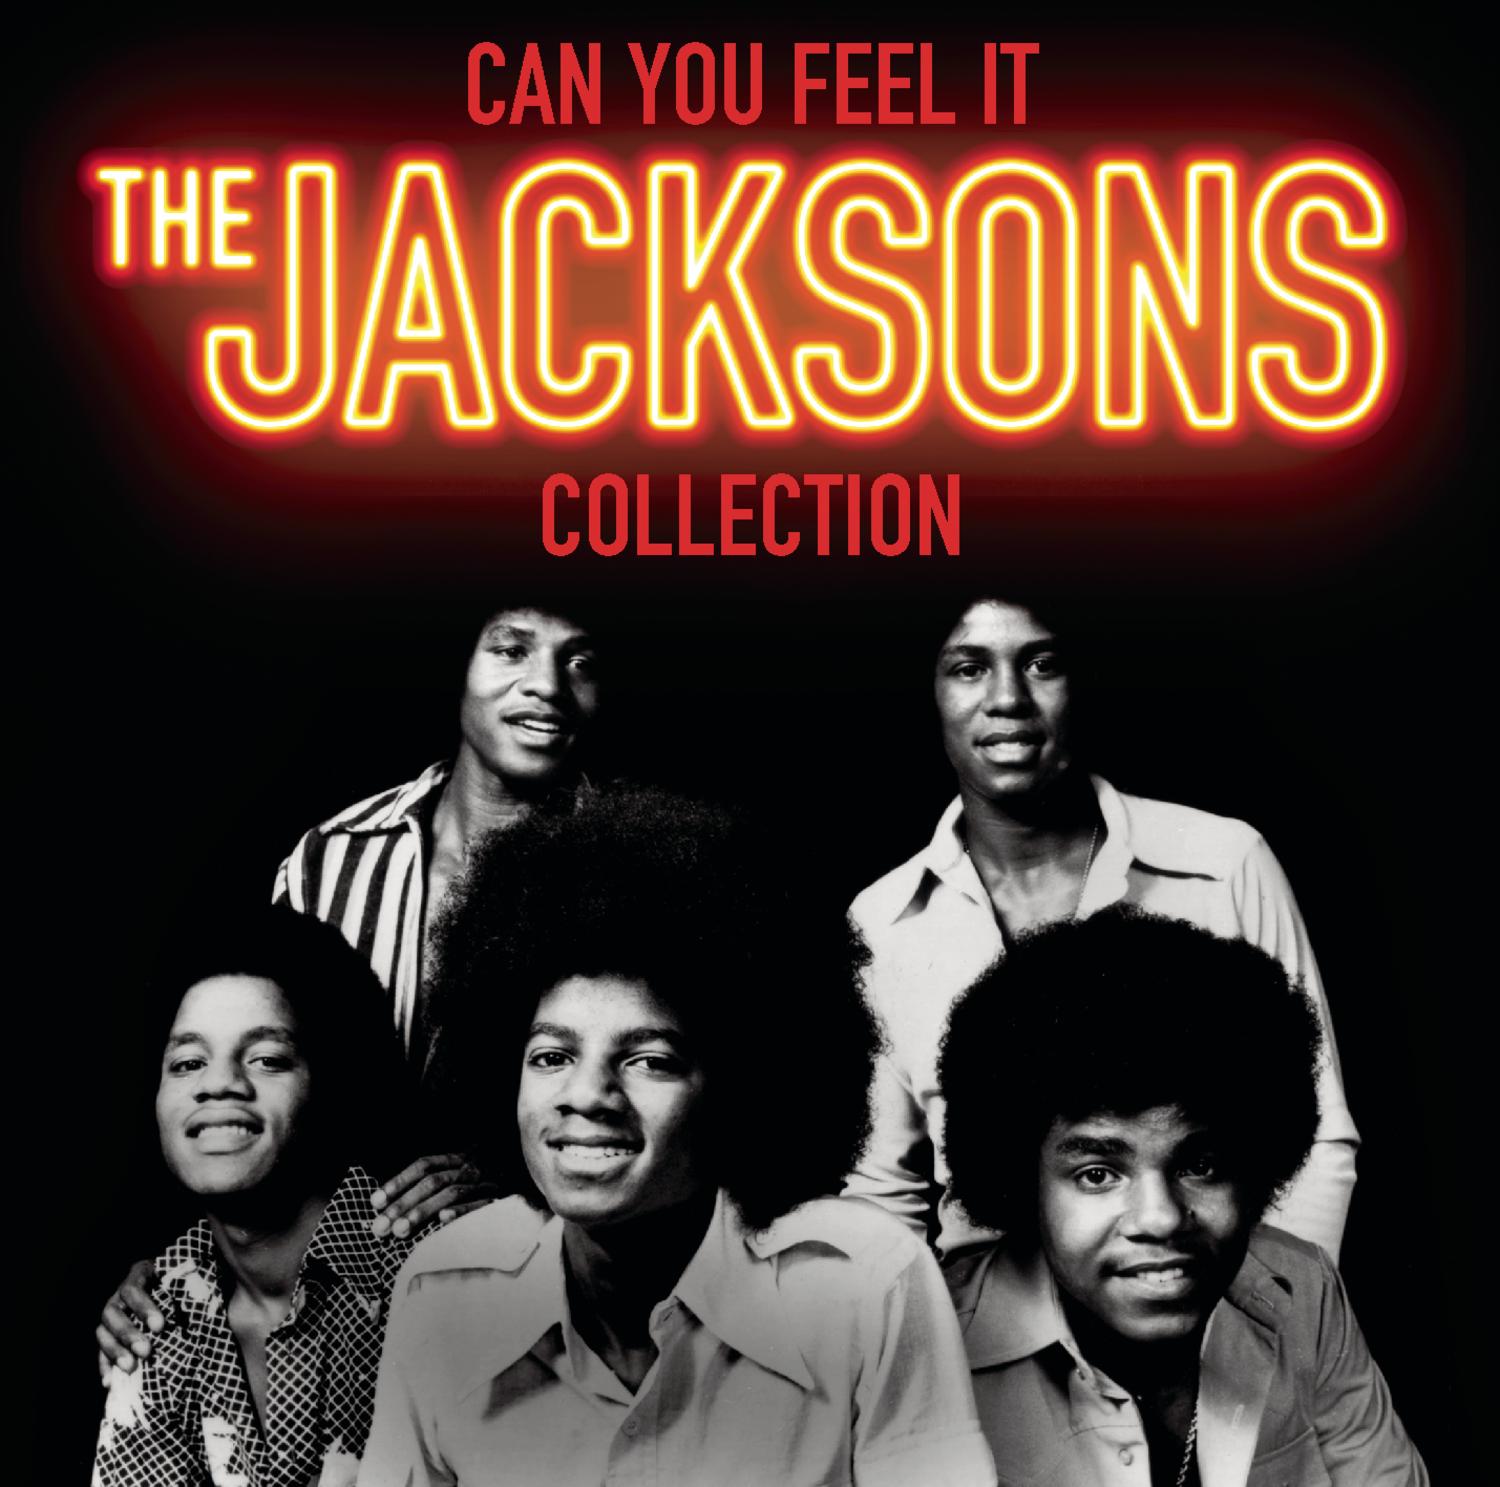 Can You Feel It: The Jacksons Collection